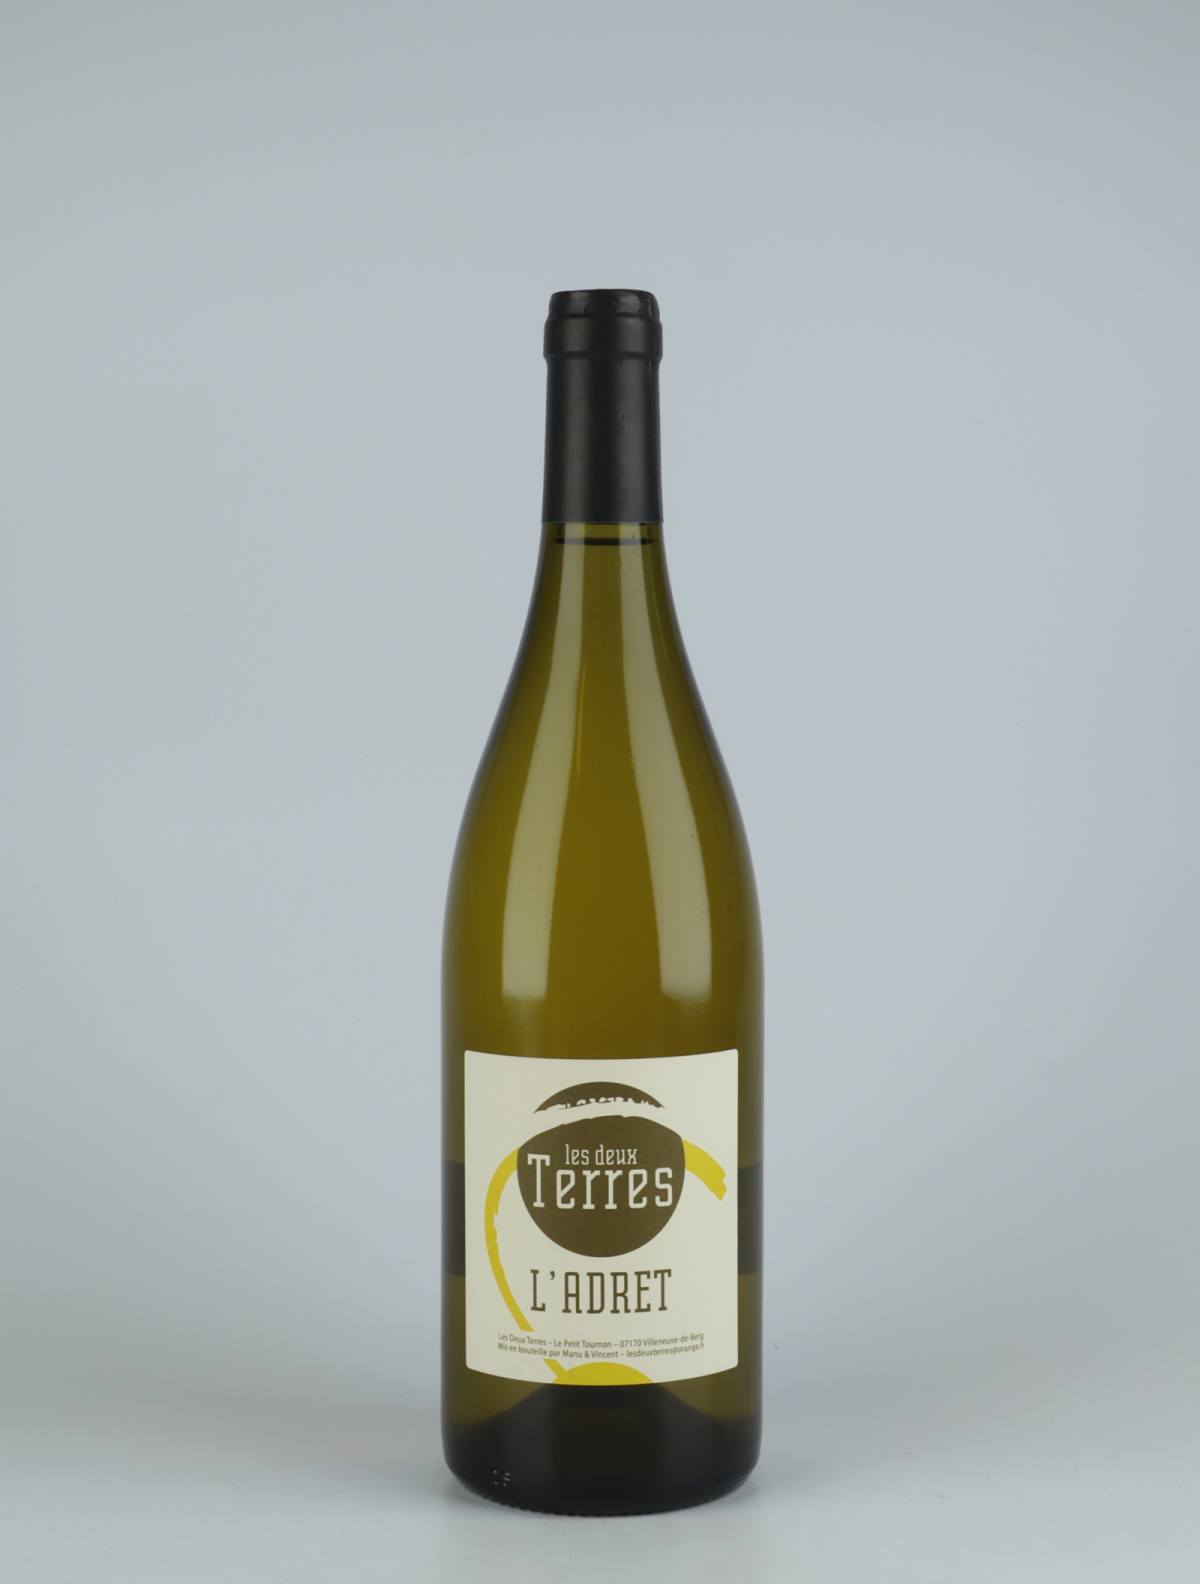 A bottle 2020 Adret White wine from Les Deux Terres, Ardèche in France